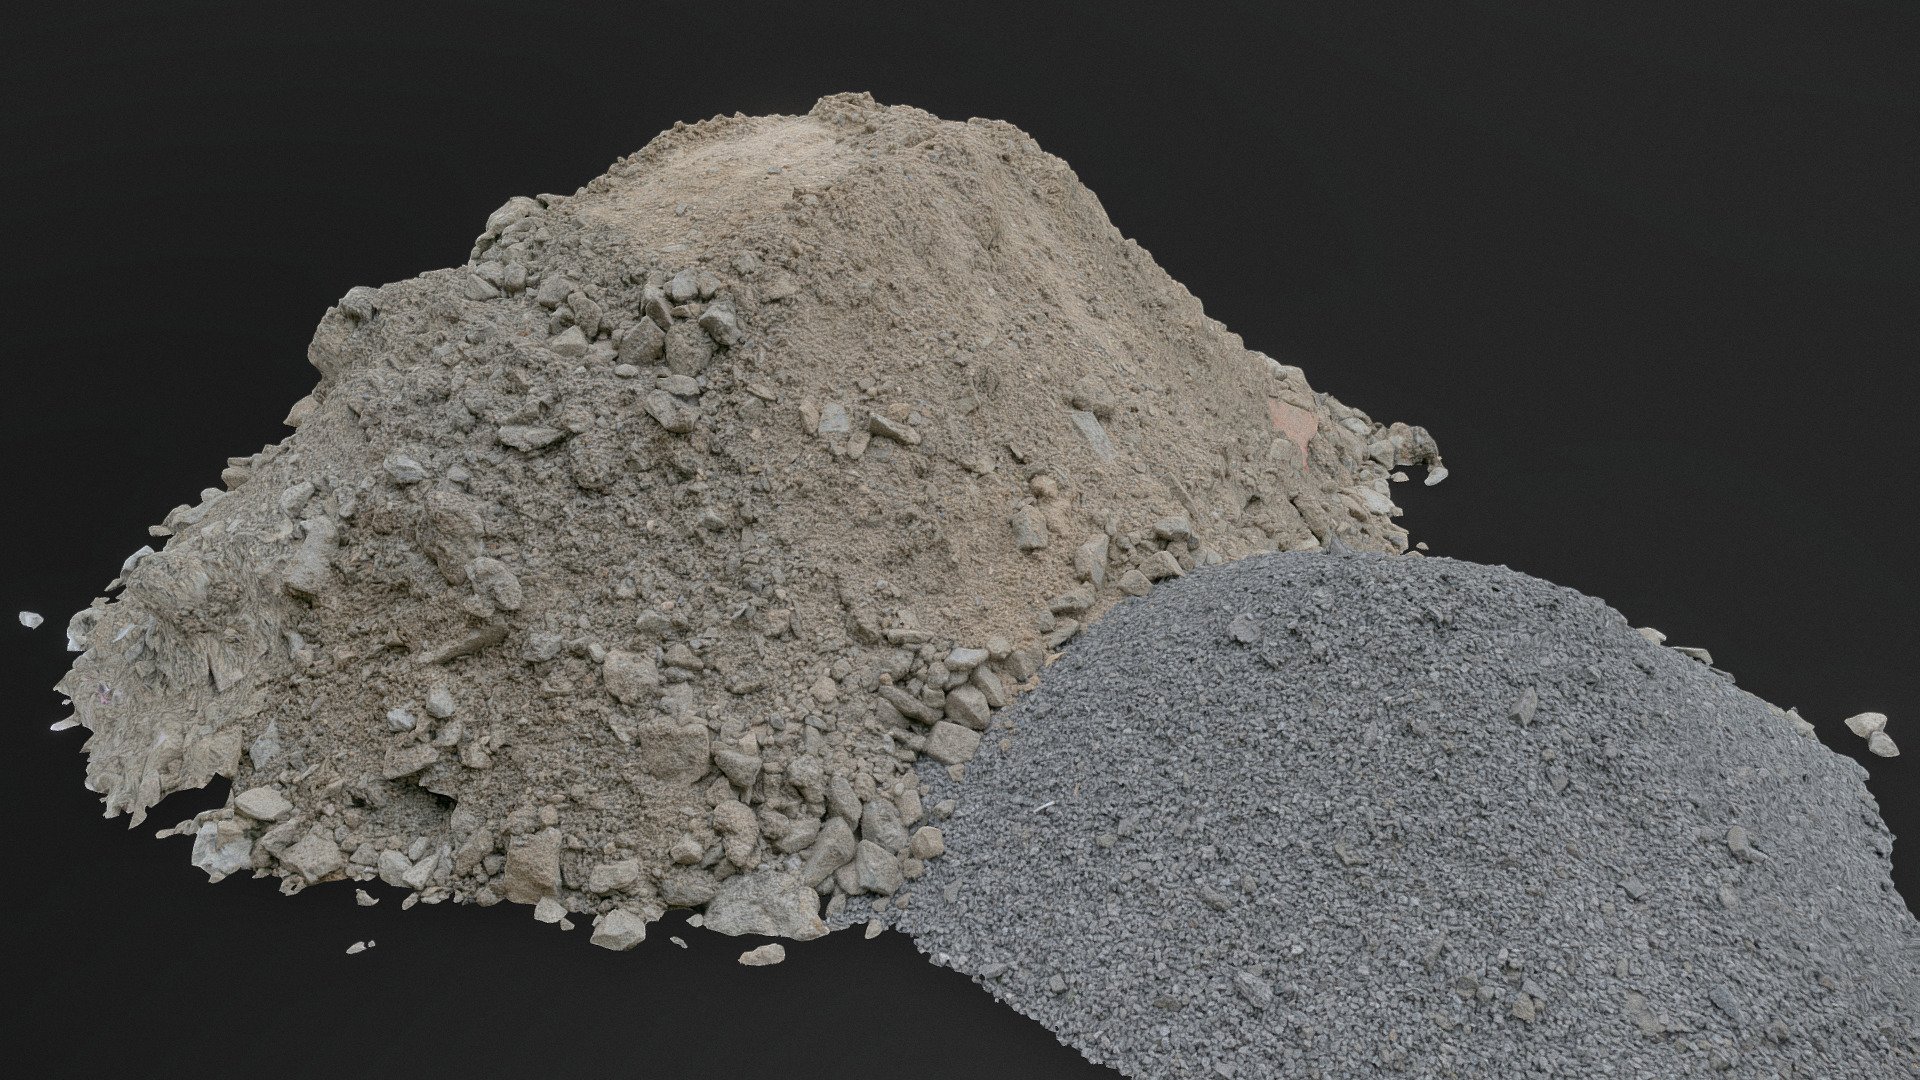 Construction yellow sand and fine gravel stone paving heap pile mound of building pavement construction material small stones pebble of quartz

photogrammetry scan (180x36mp), 4x8k textures + hd normals - Two construction material piles - Buy Royalty Free 3D model by matousekfoto 3d model